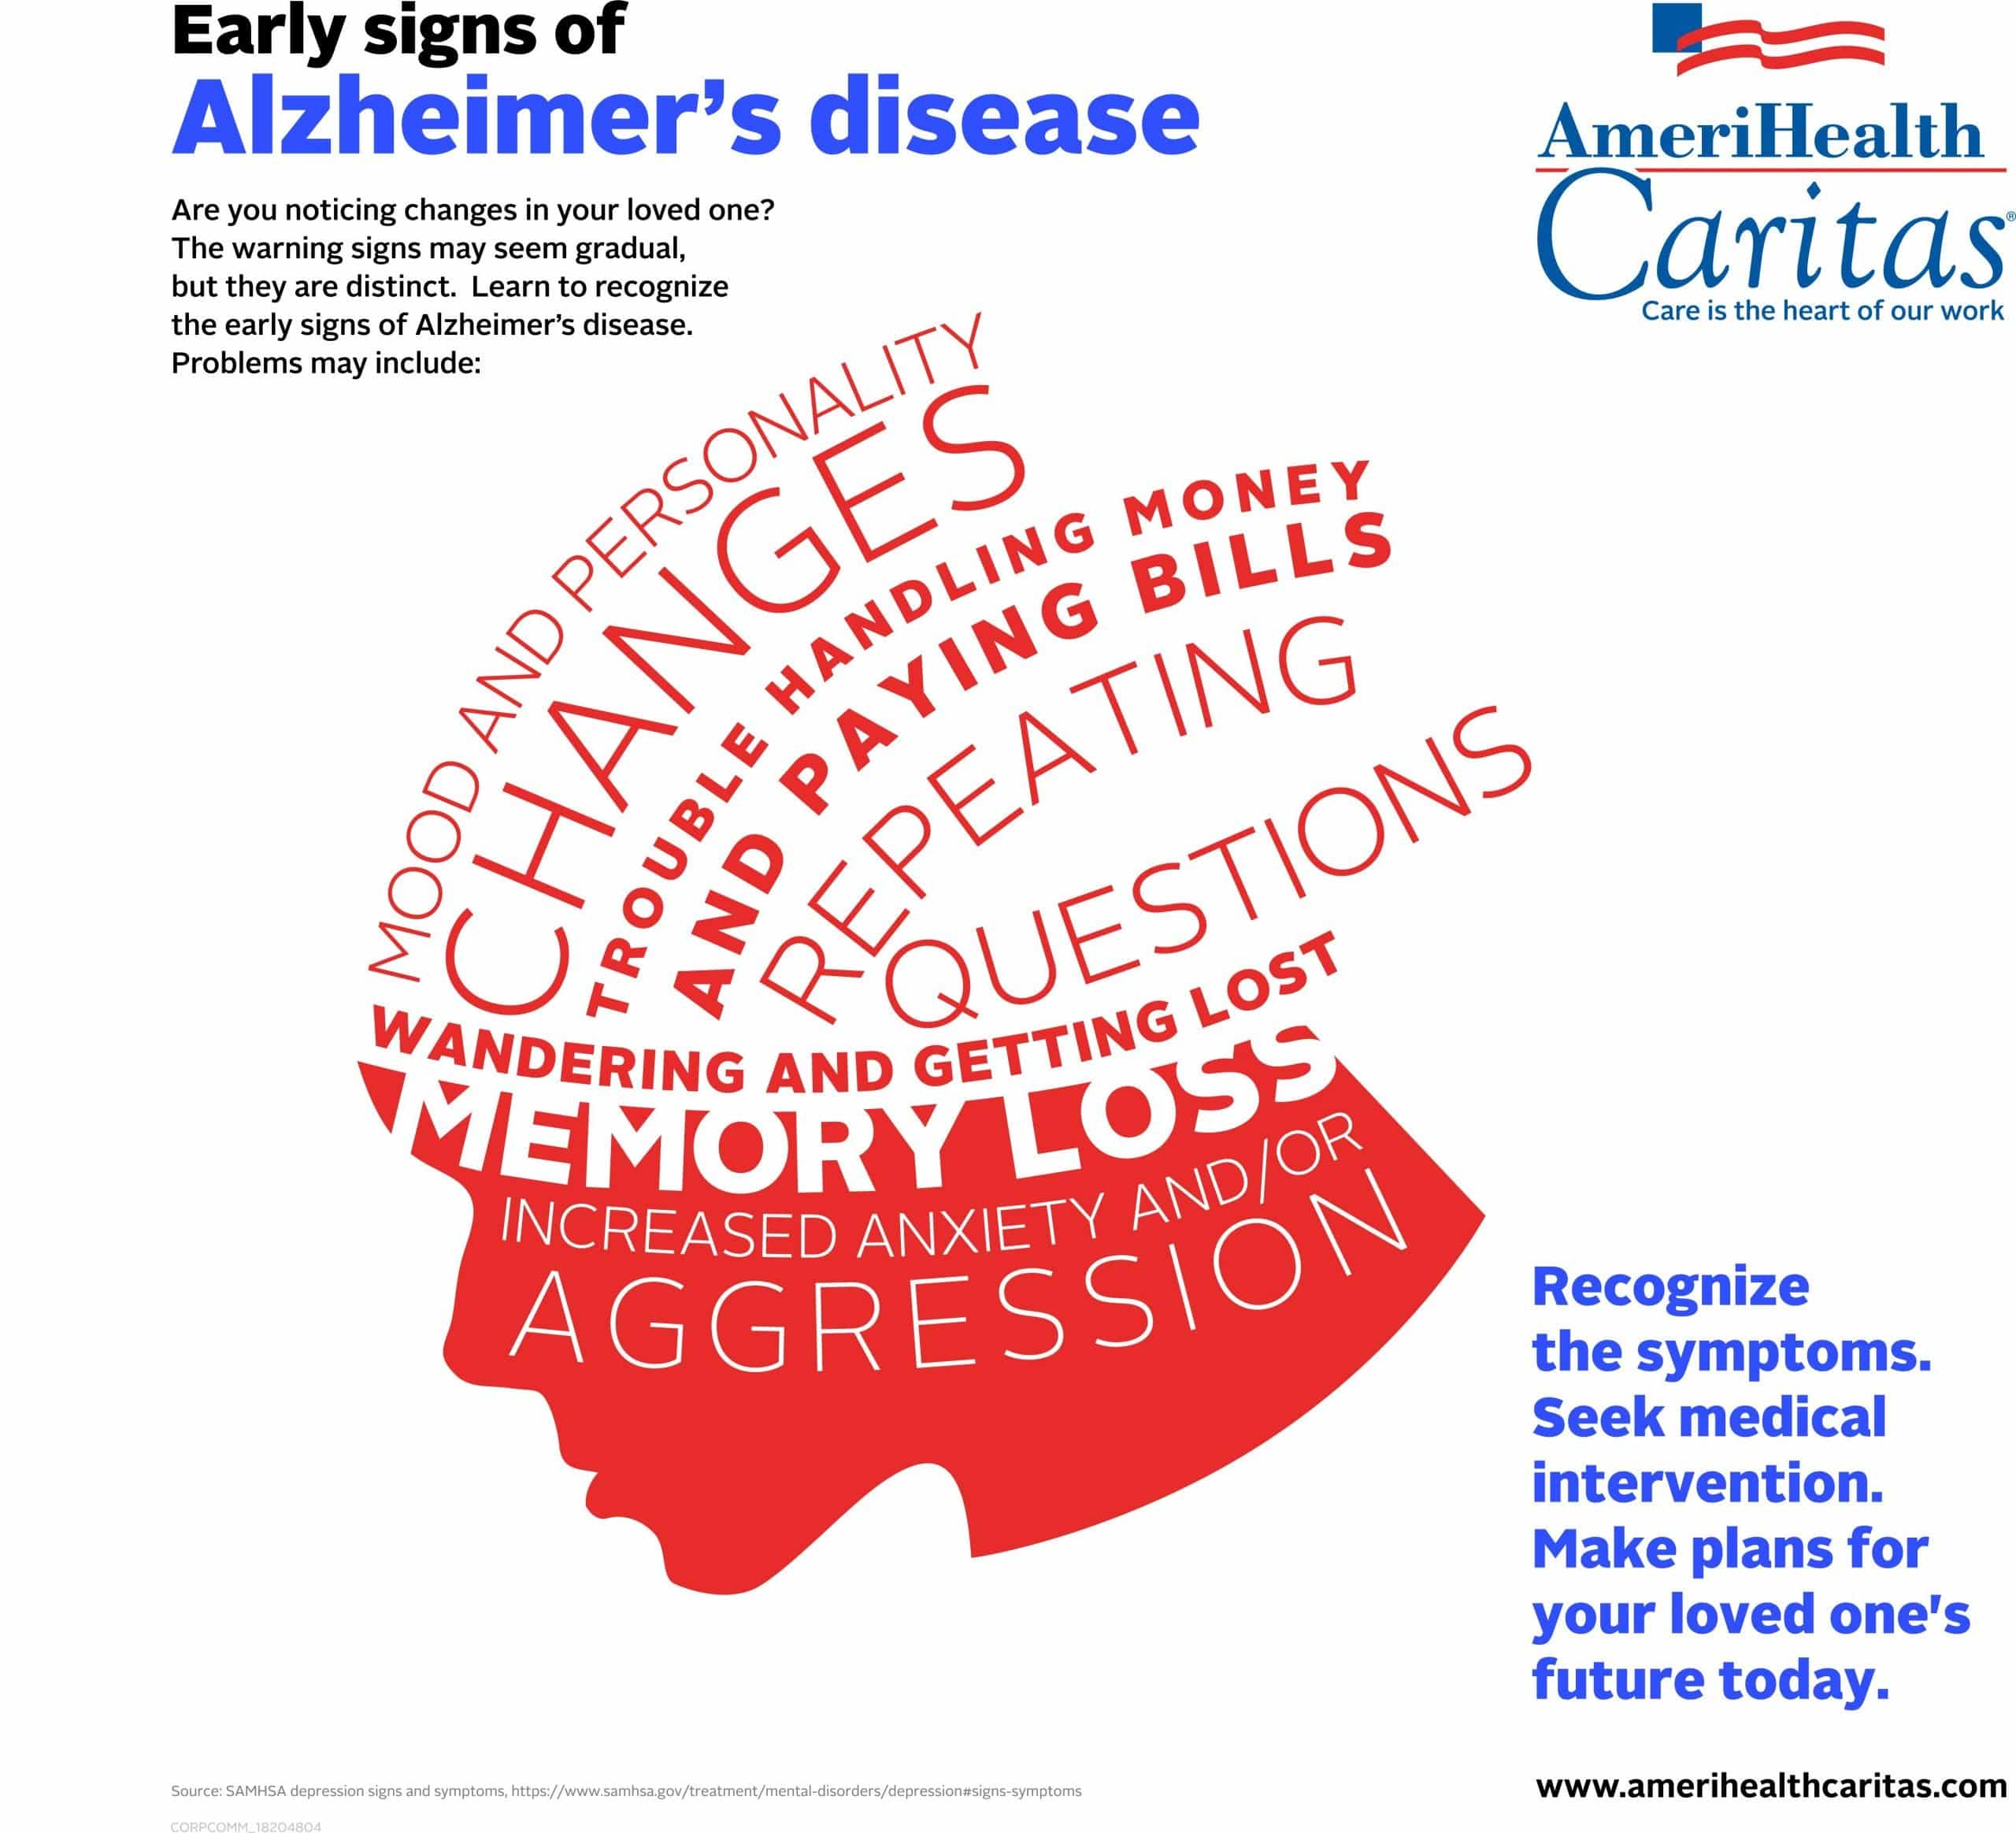 What Are Some Of The Early Signs Of Alzheimers